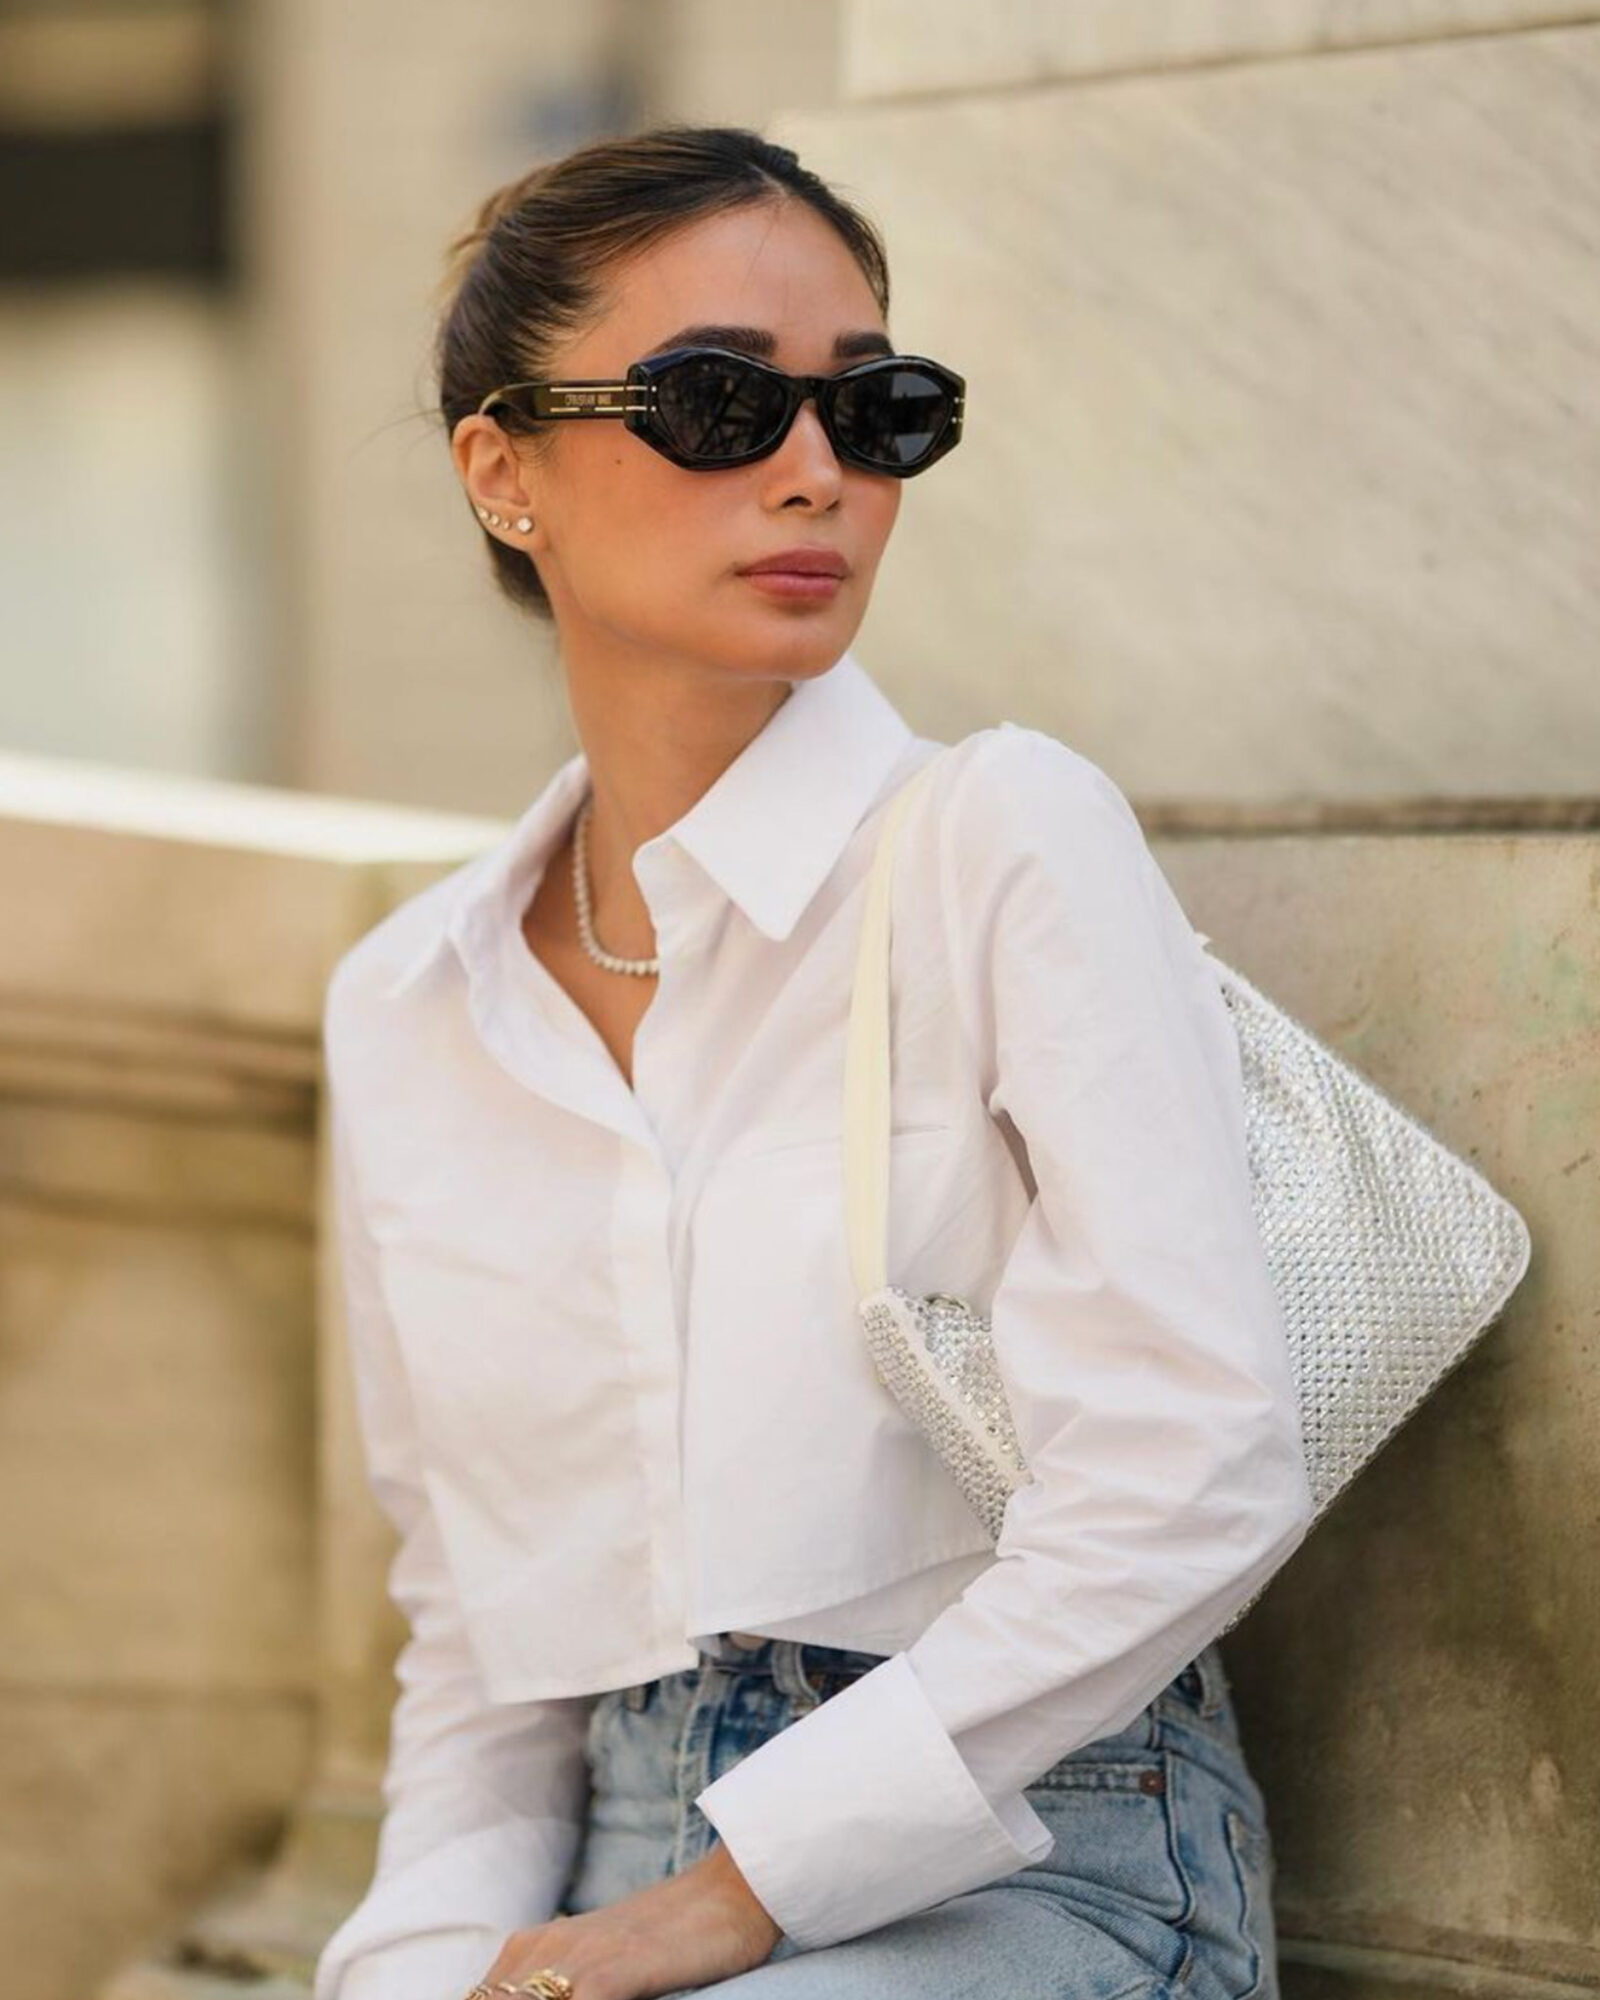 Heart Evangelista wearing Black butterfly sunglasses from Dior